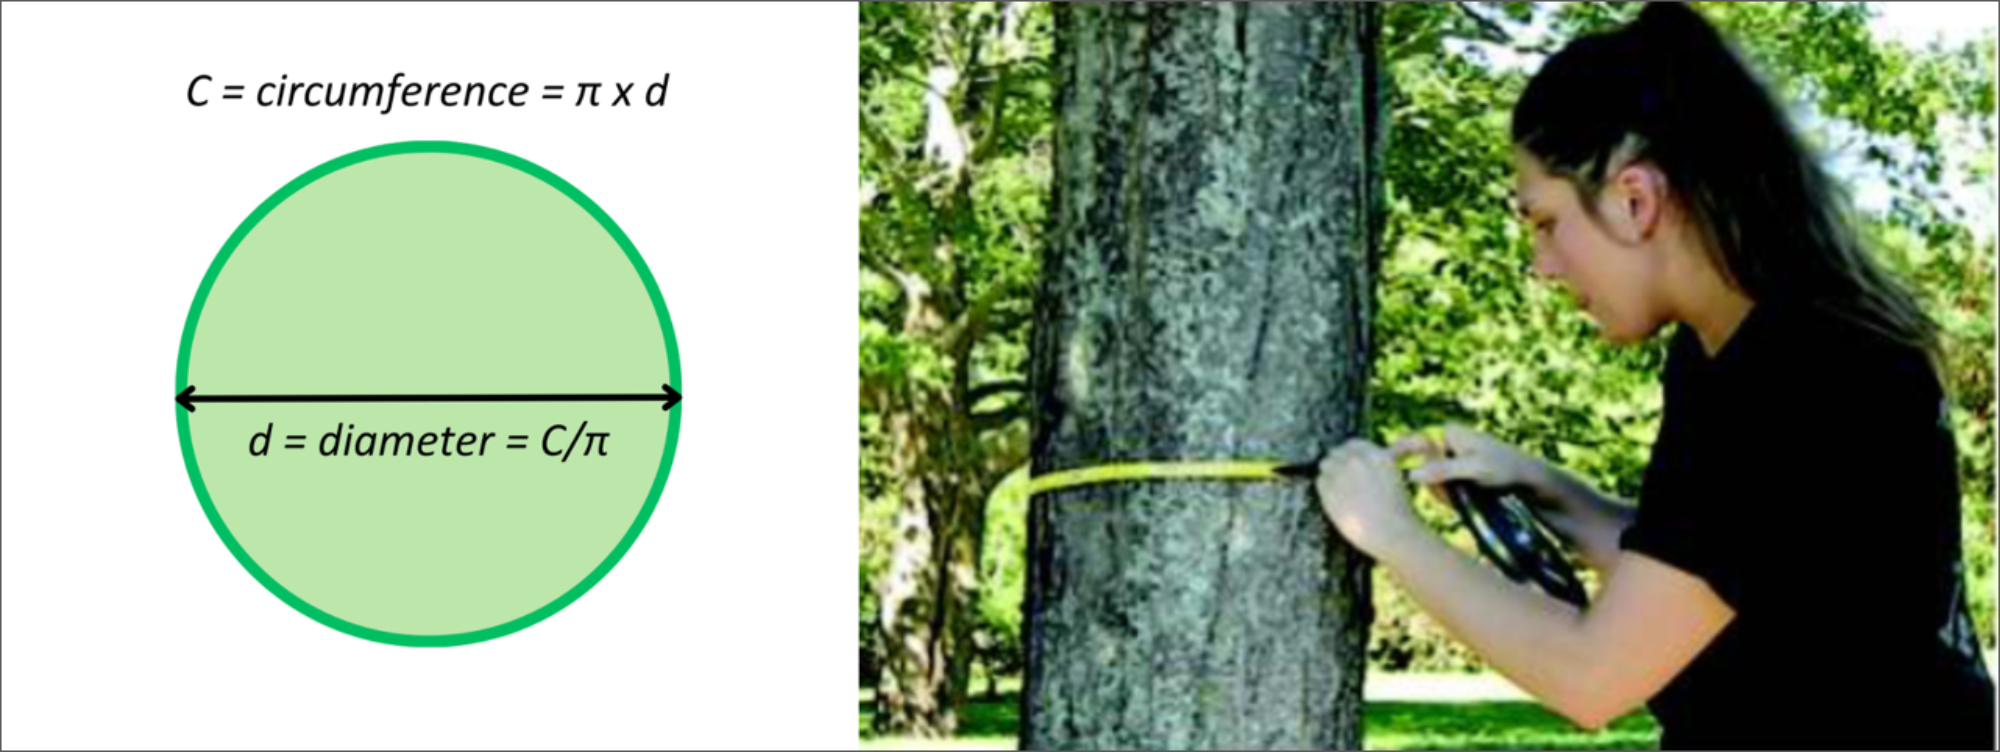 Image showing a diagram of a circle, with diameter and circumference, and a photo of a young woman measuring the distance around a tree with a tape measure.